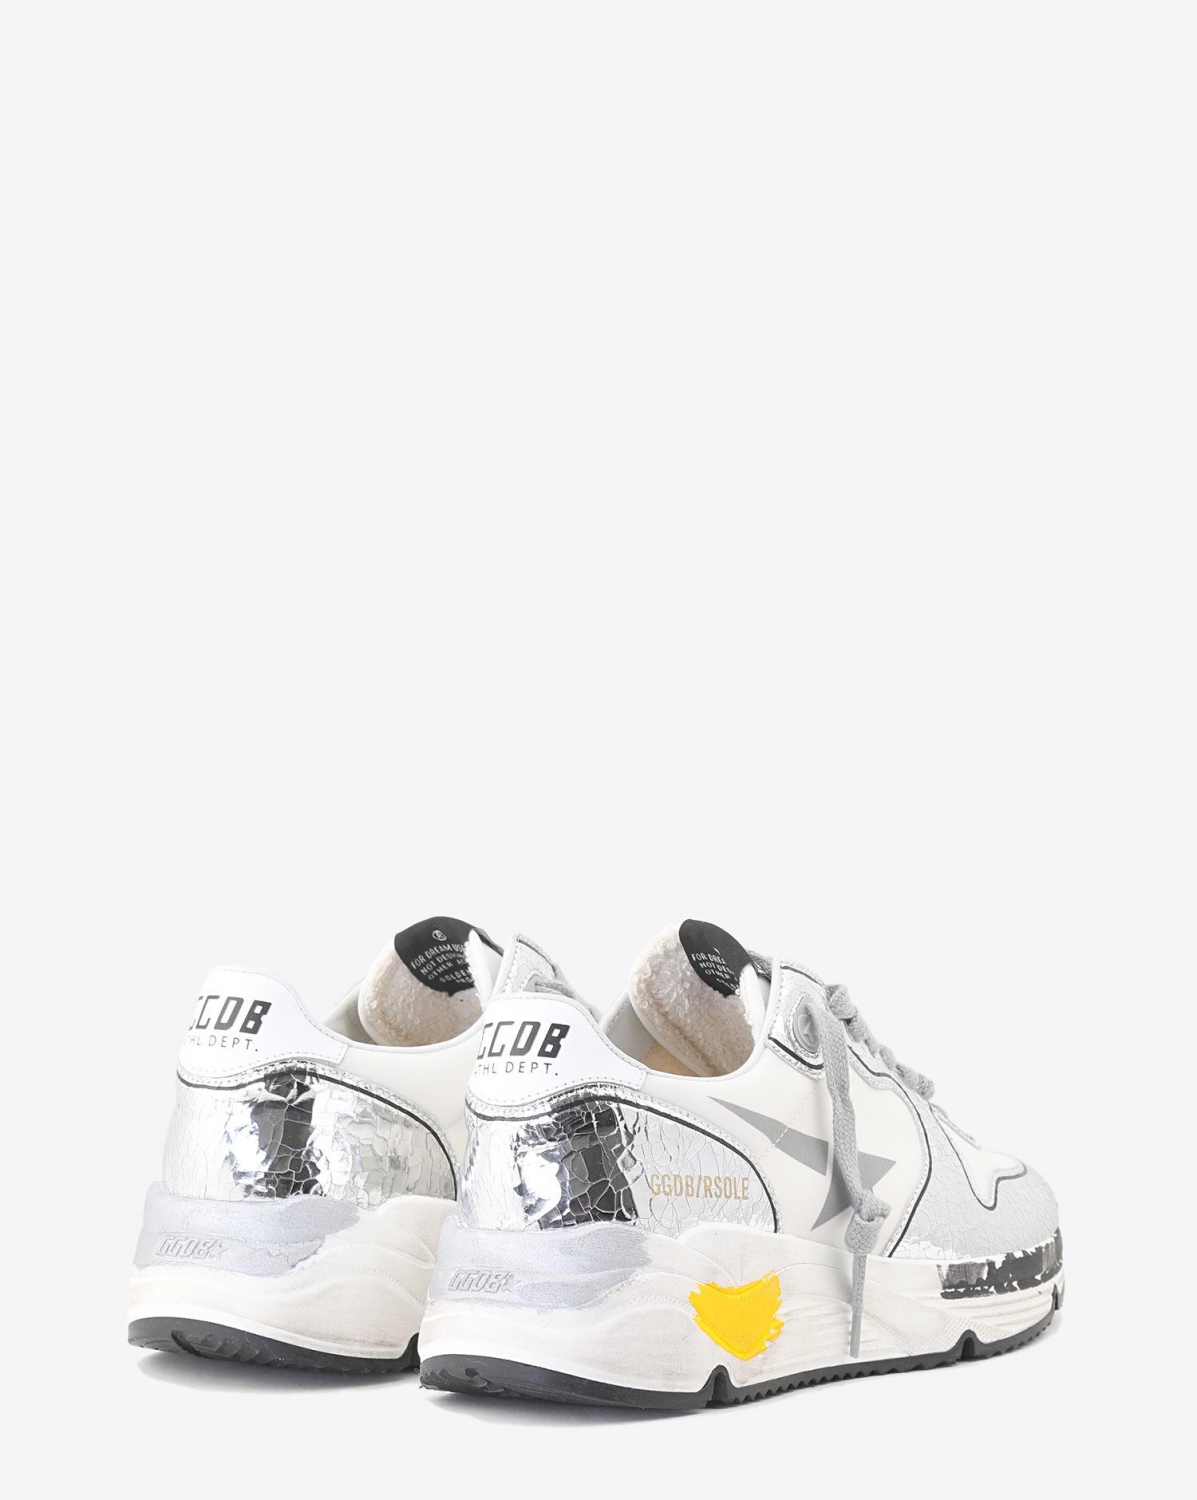 Sneakers running sole white silver crack 80185 Golden Goose. 